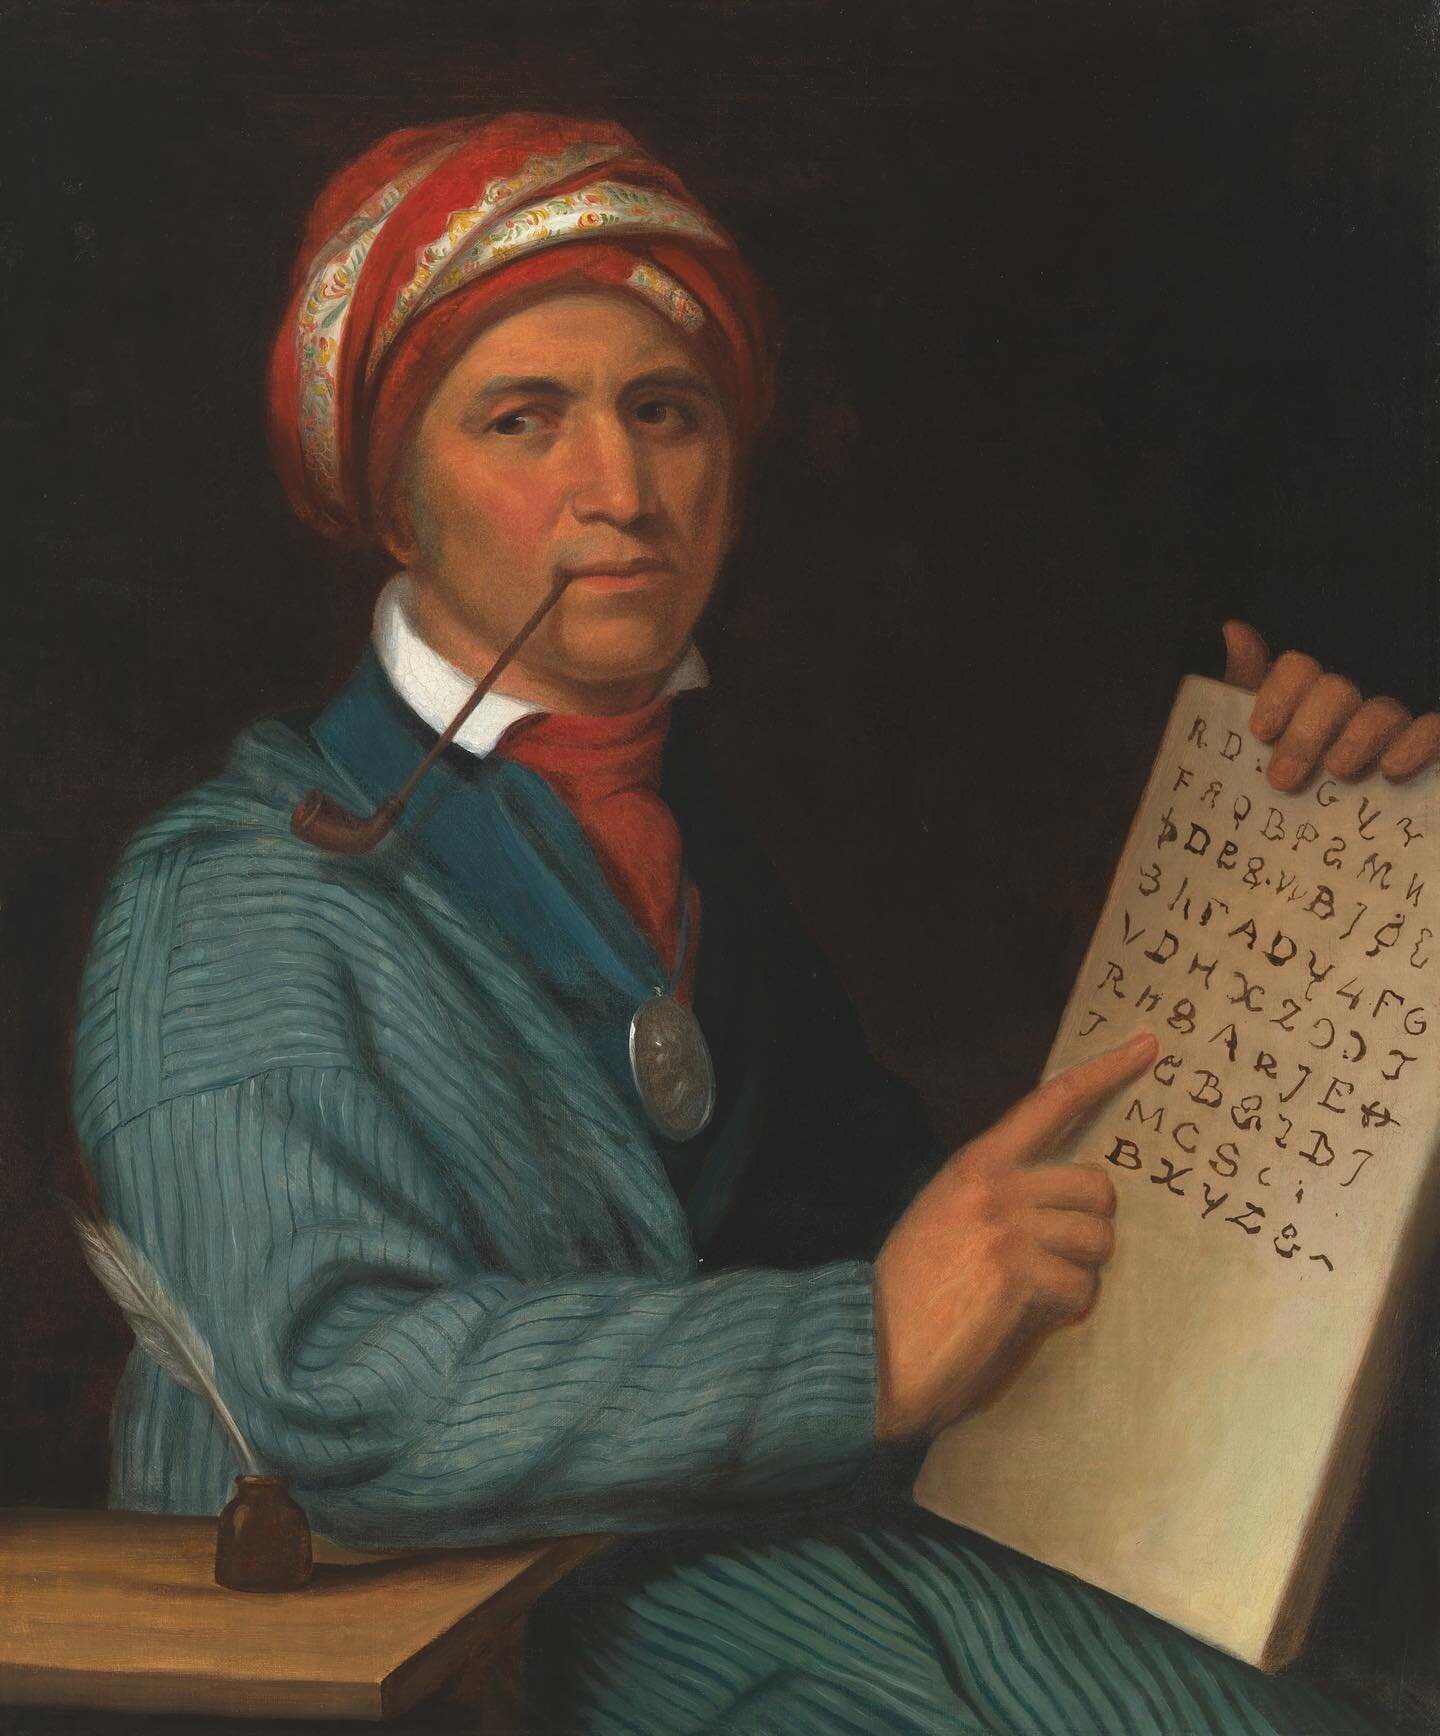 &quot;Sequoyah&quot; (circa 1830), Henry Inman (American, 1801-1846), Copy after Charles Bird King (American, 1785-1862), Oil on canvas. Source: National Portrait Gallery, Washington D.C.⁠
⁠
***⁠
⁠
&quot;Sequoyah (Cherokee, c.1770-1843) was the son o